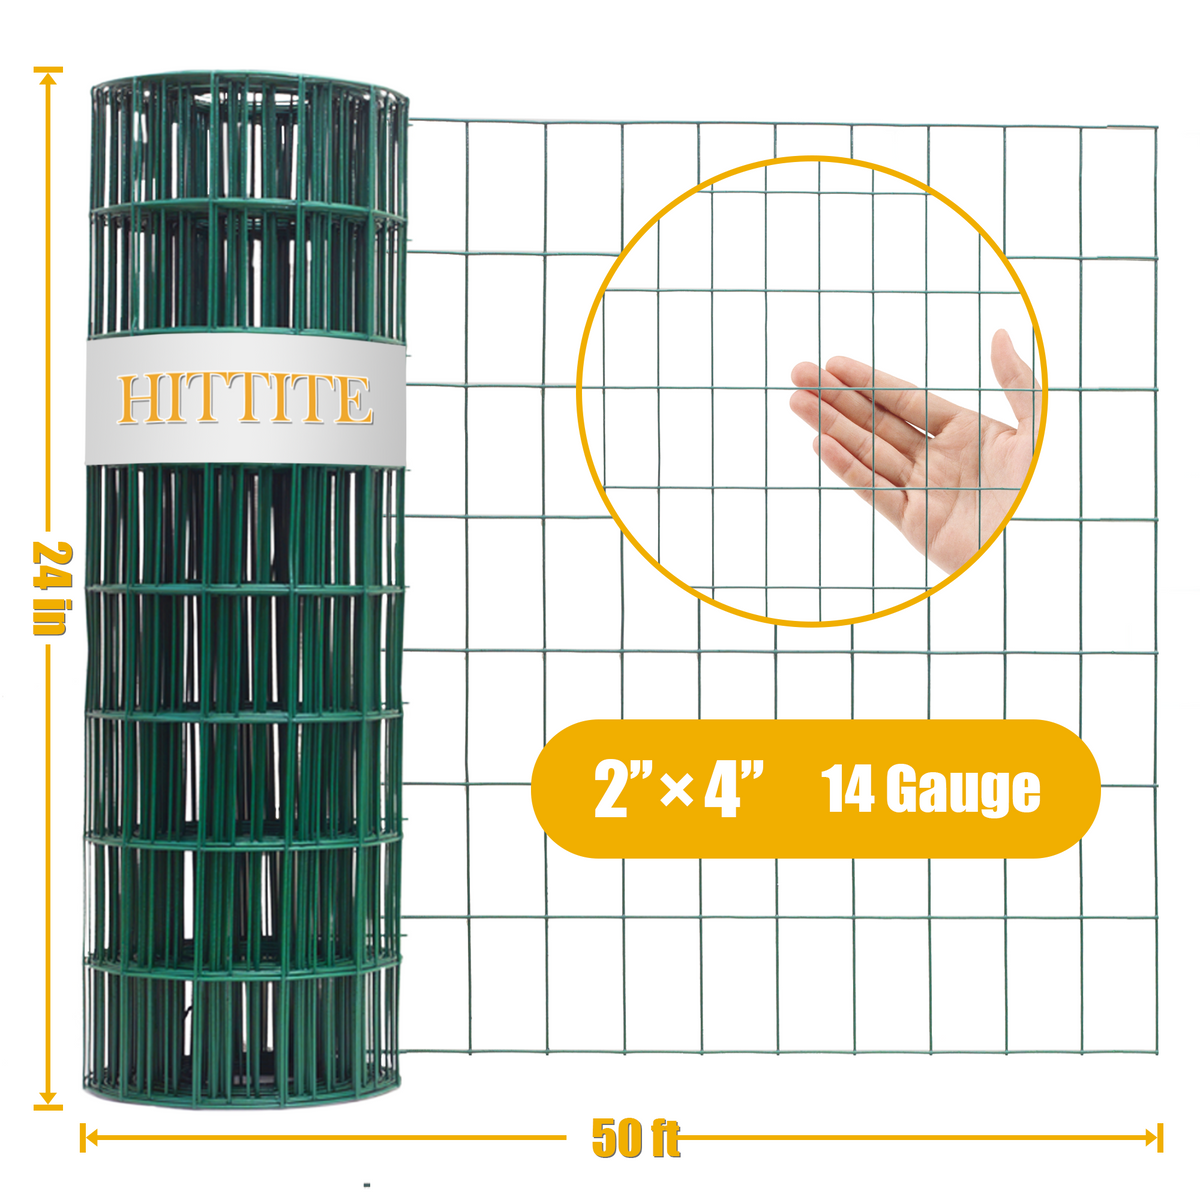 HITTITE Green PVC Coated Welded Wire Fencing, 24in x 50ft, 2 inch x 4 inch 14 GA Welded Wire Fence Rolls, Black Metal Garden Fence Wire Roll Garden Border Fencing for Yard Vegetable Plant Protection